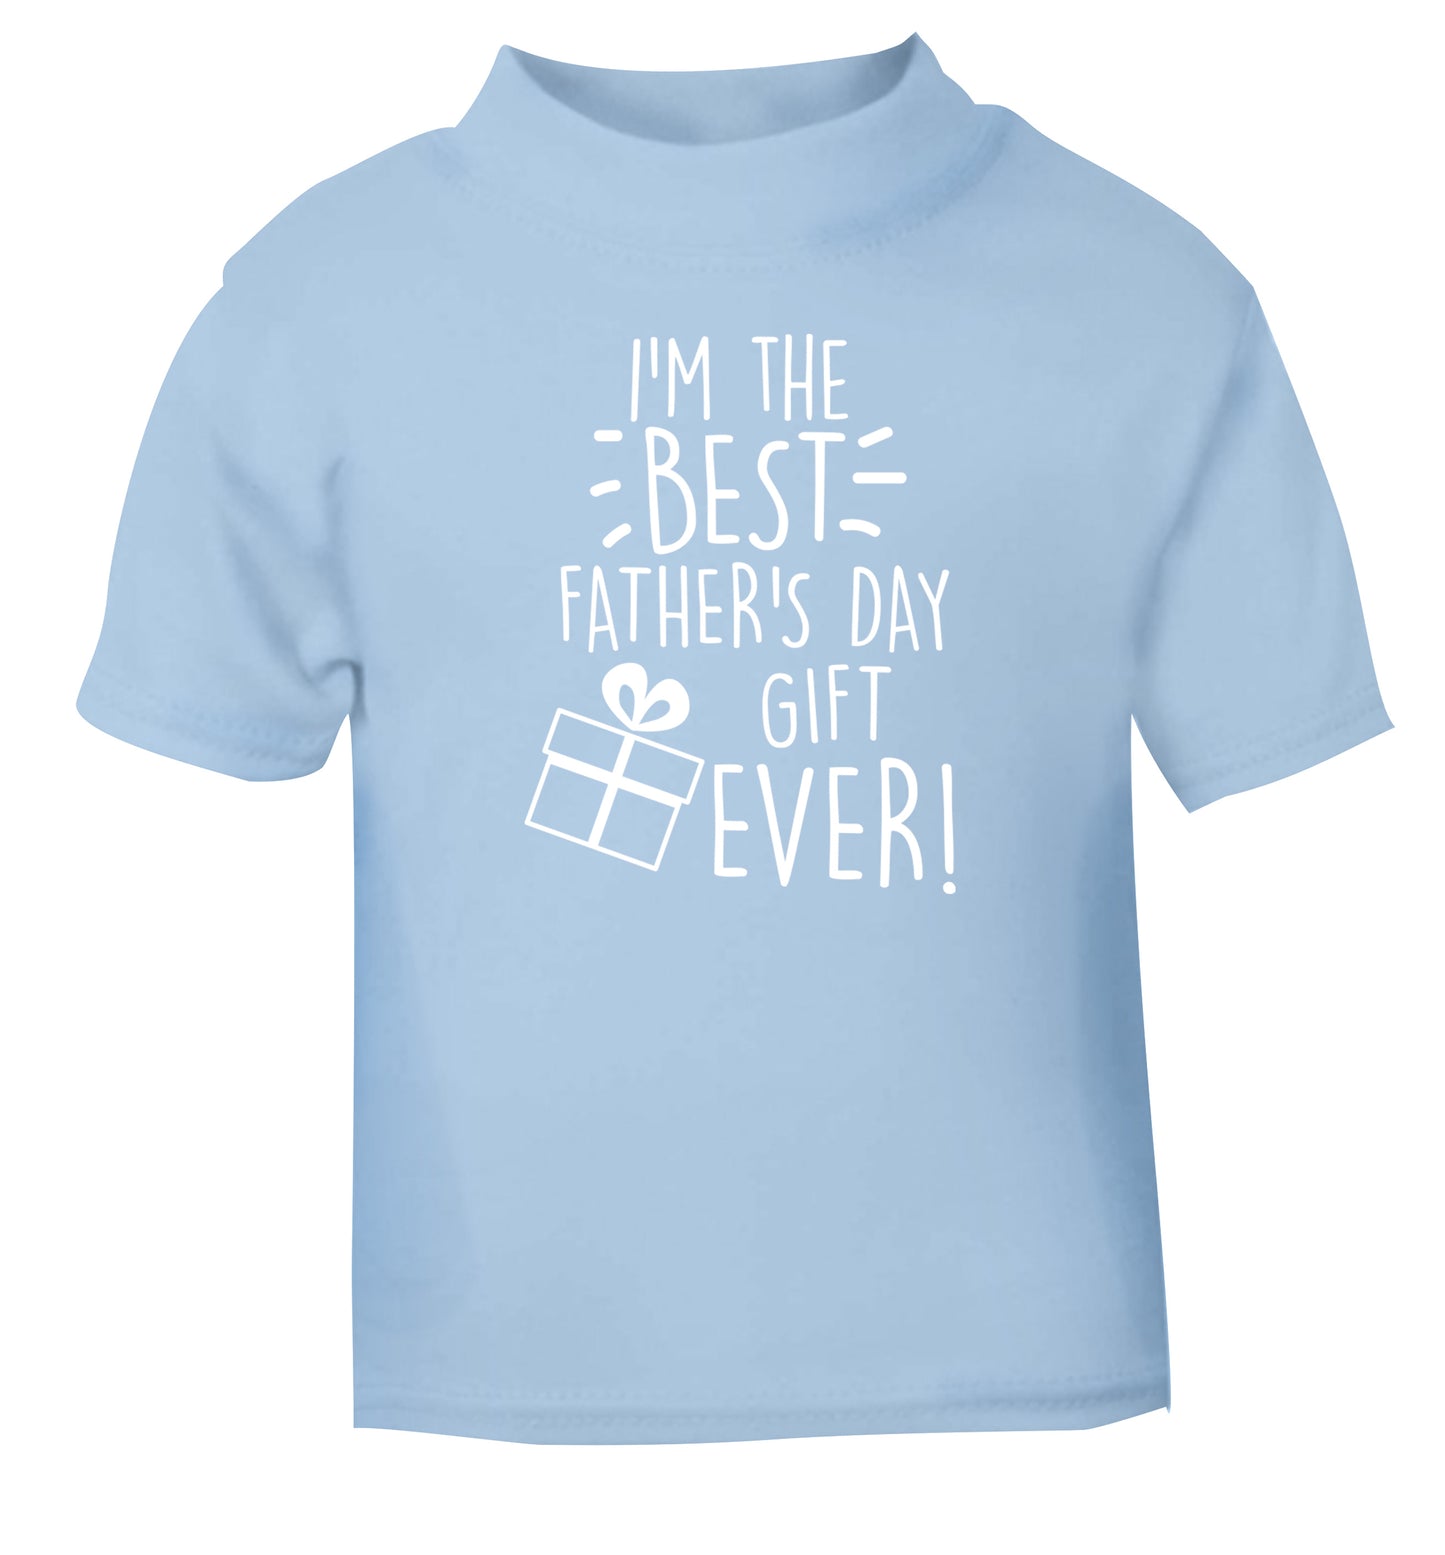 I'm the BEST father's day gift ever! light blue Baby Toddler Tshirt 2 Years